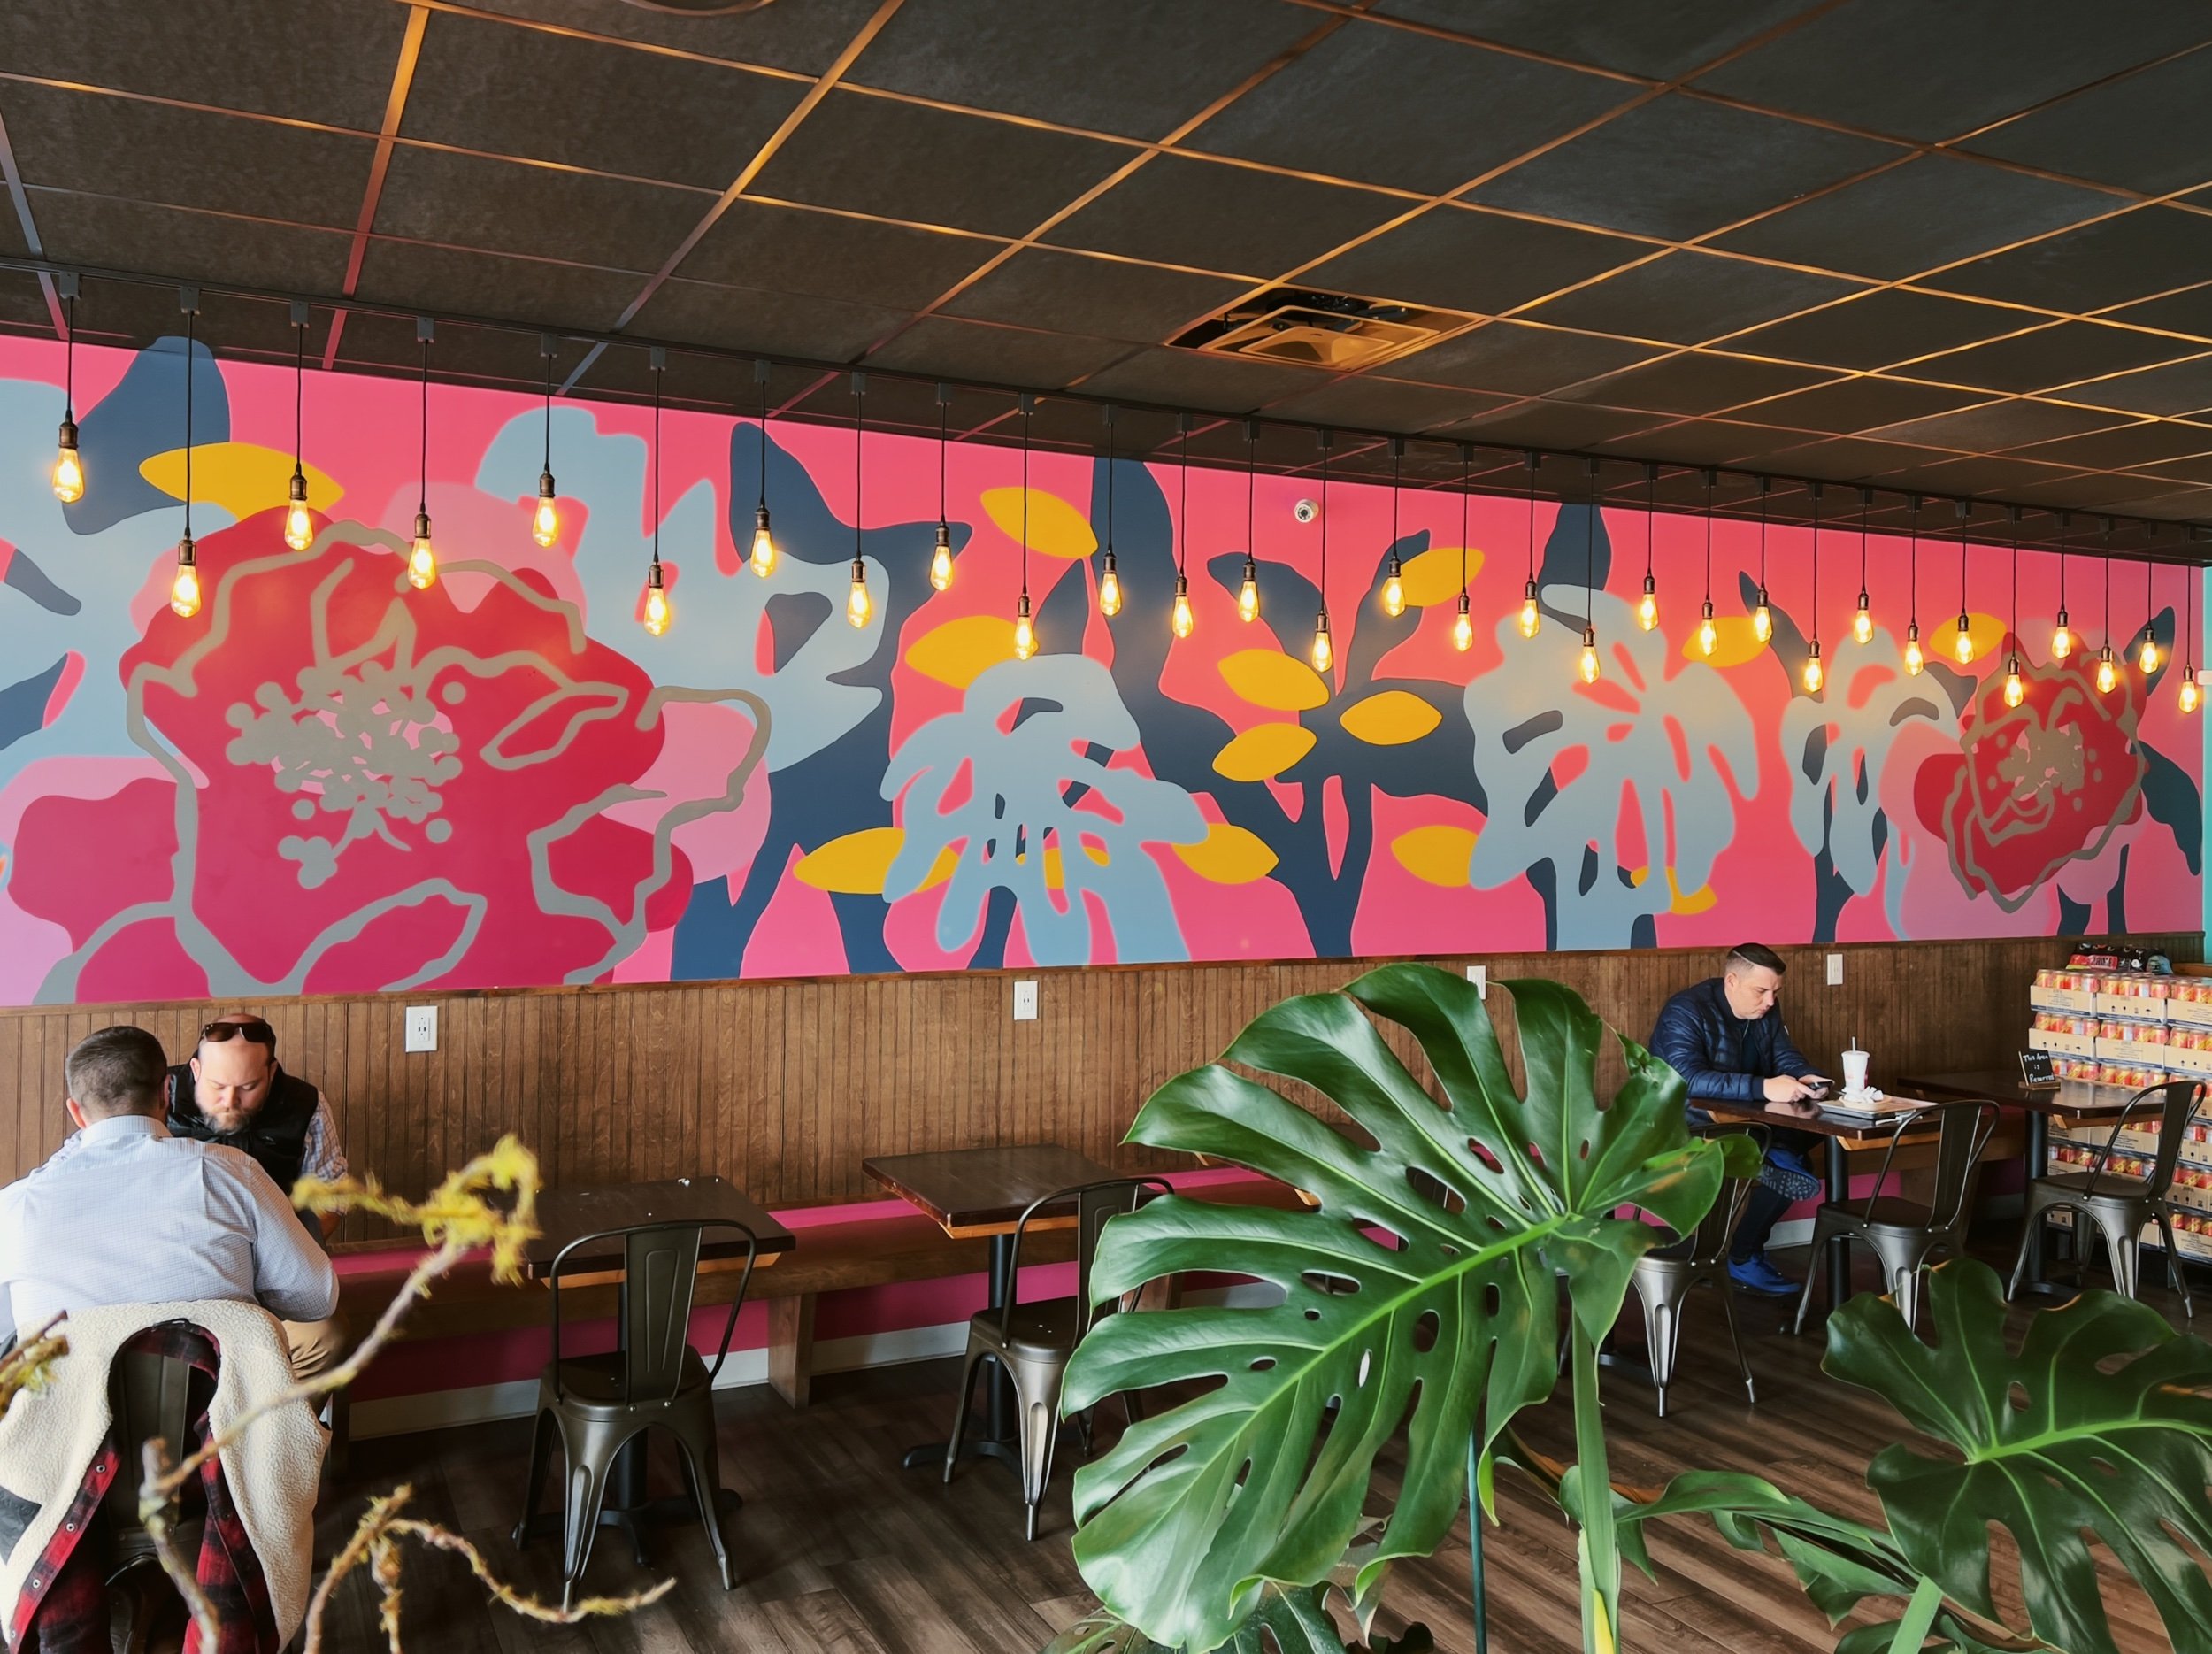  Commissioned mural for Big Fin Poke in South Portland, ME. This piece was designed and painted by hand in January 2023. 